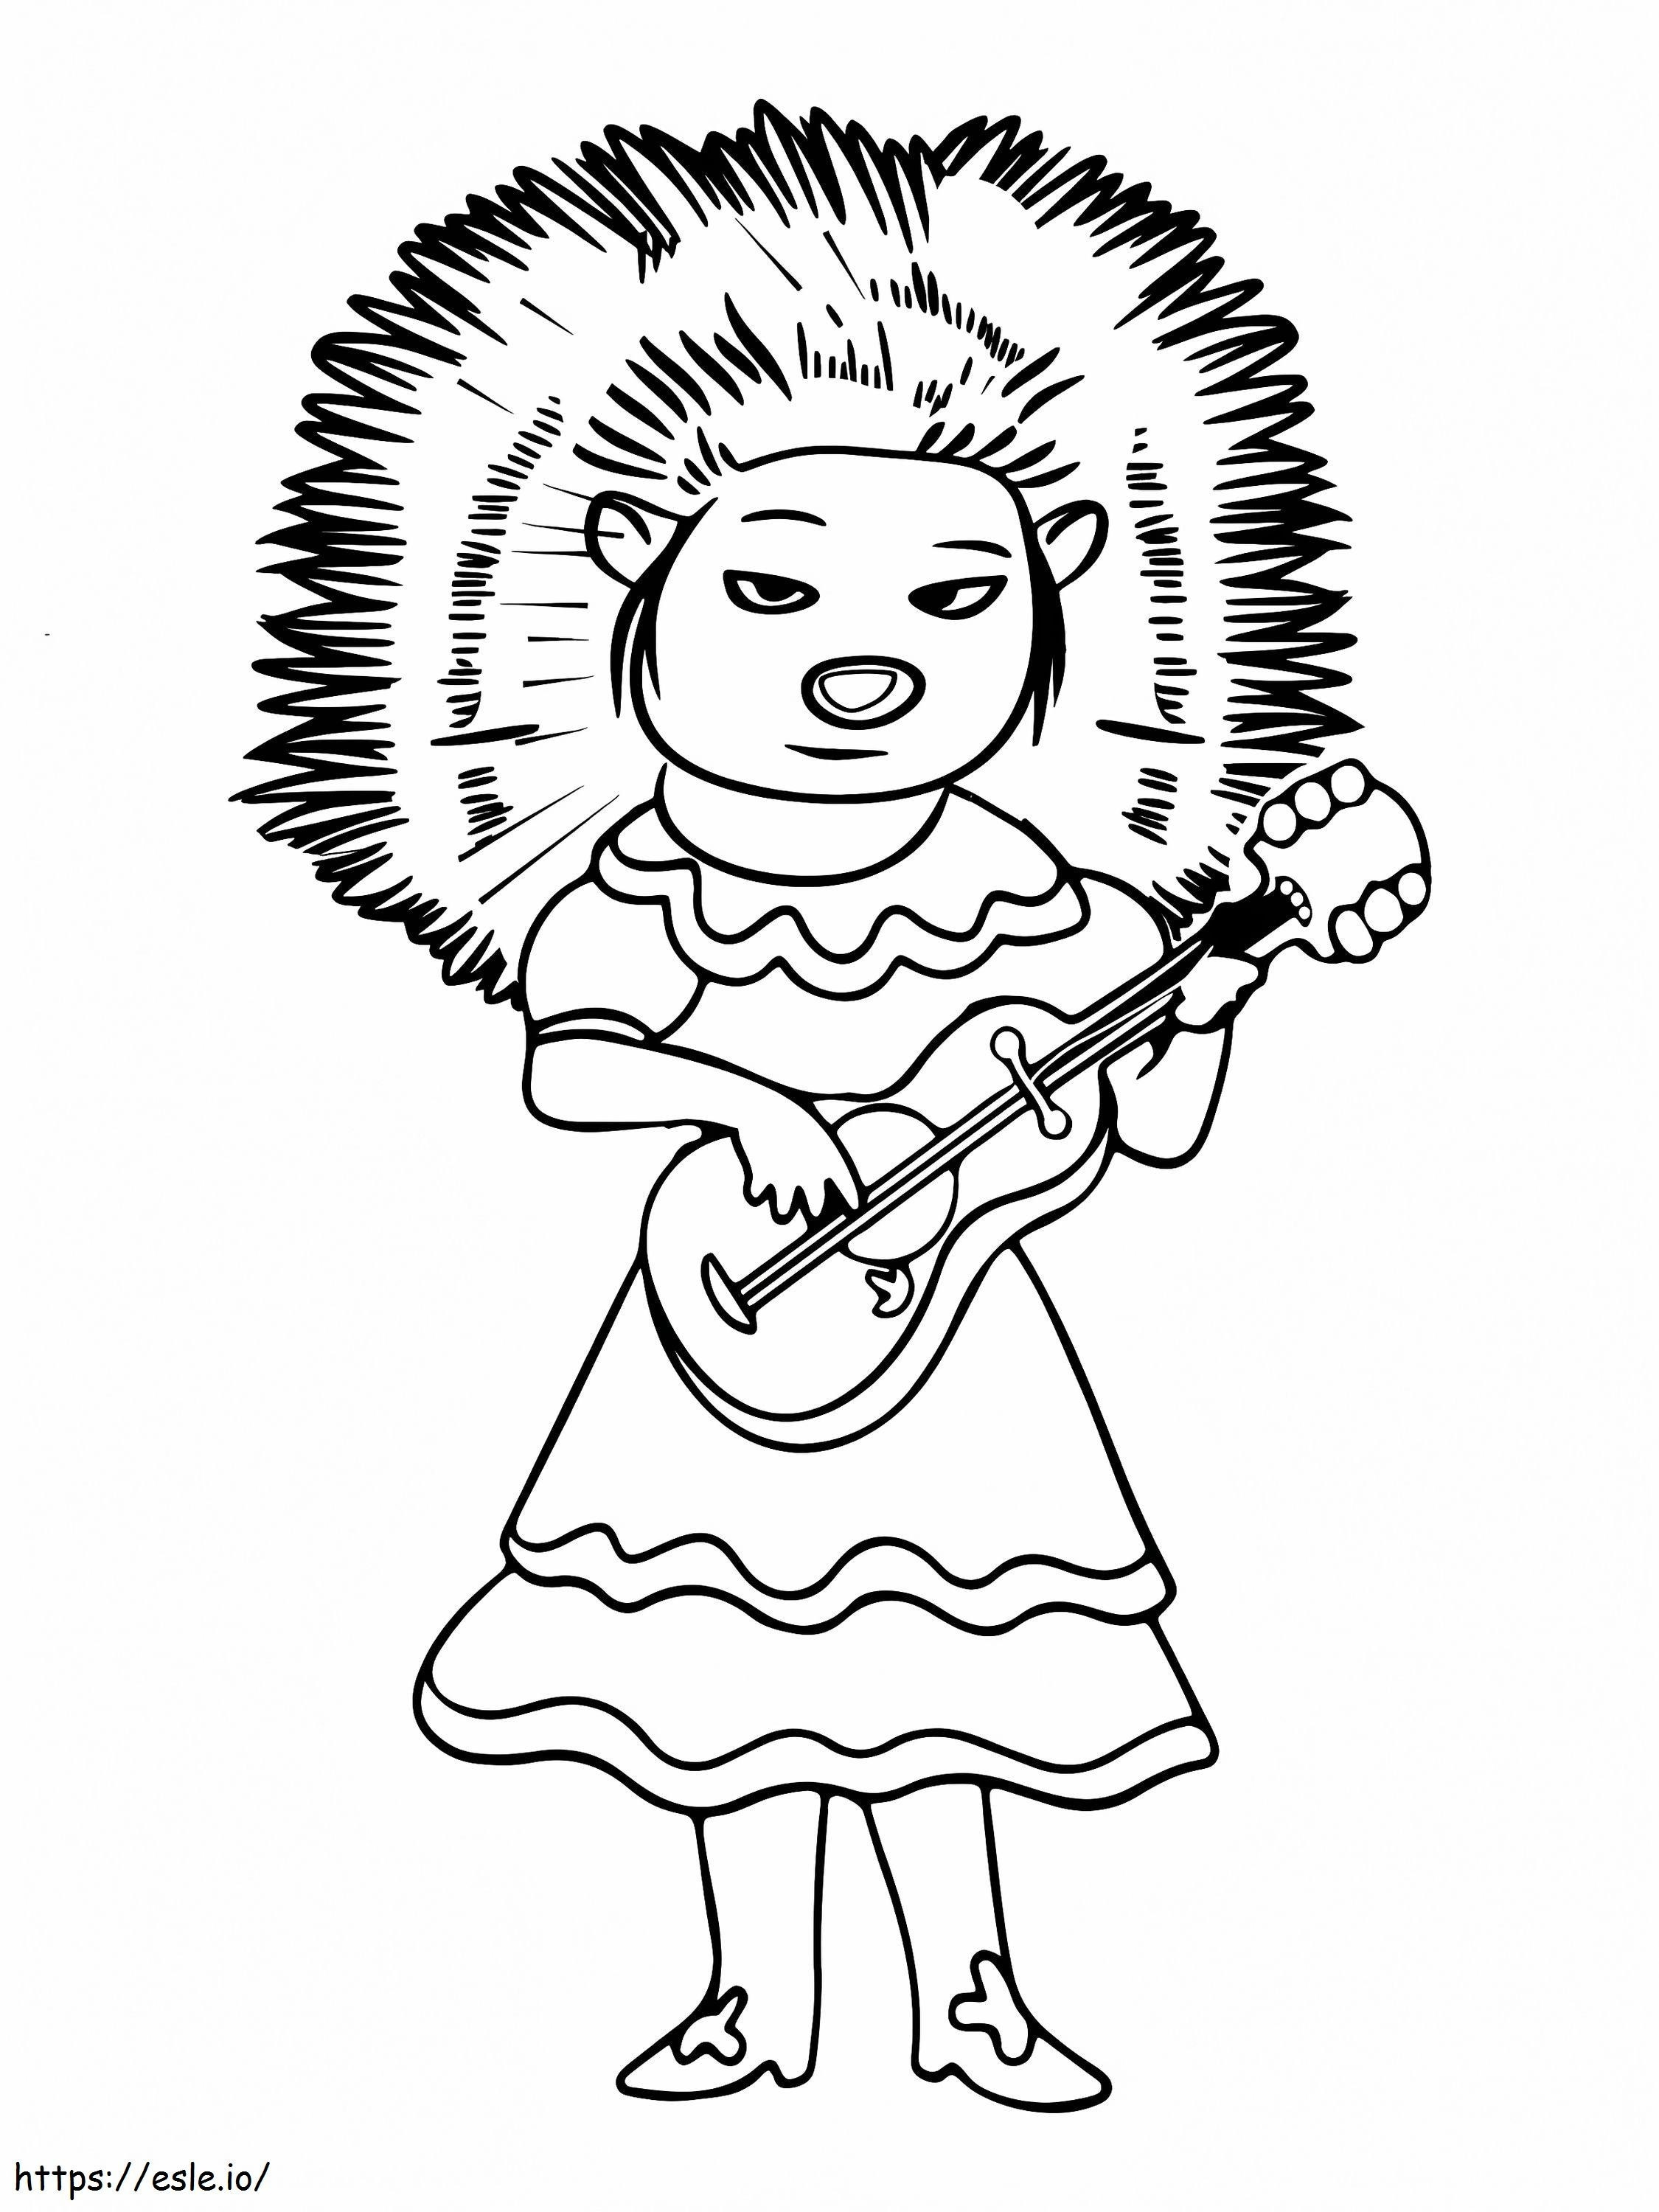 Gorgeous Ash With Guitar coloring page